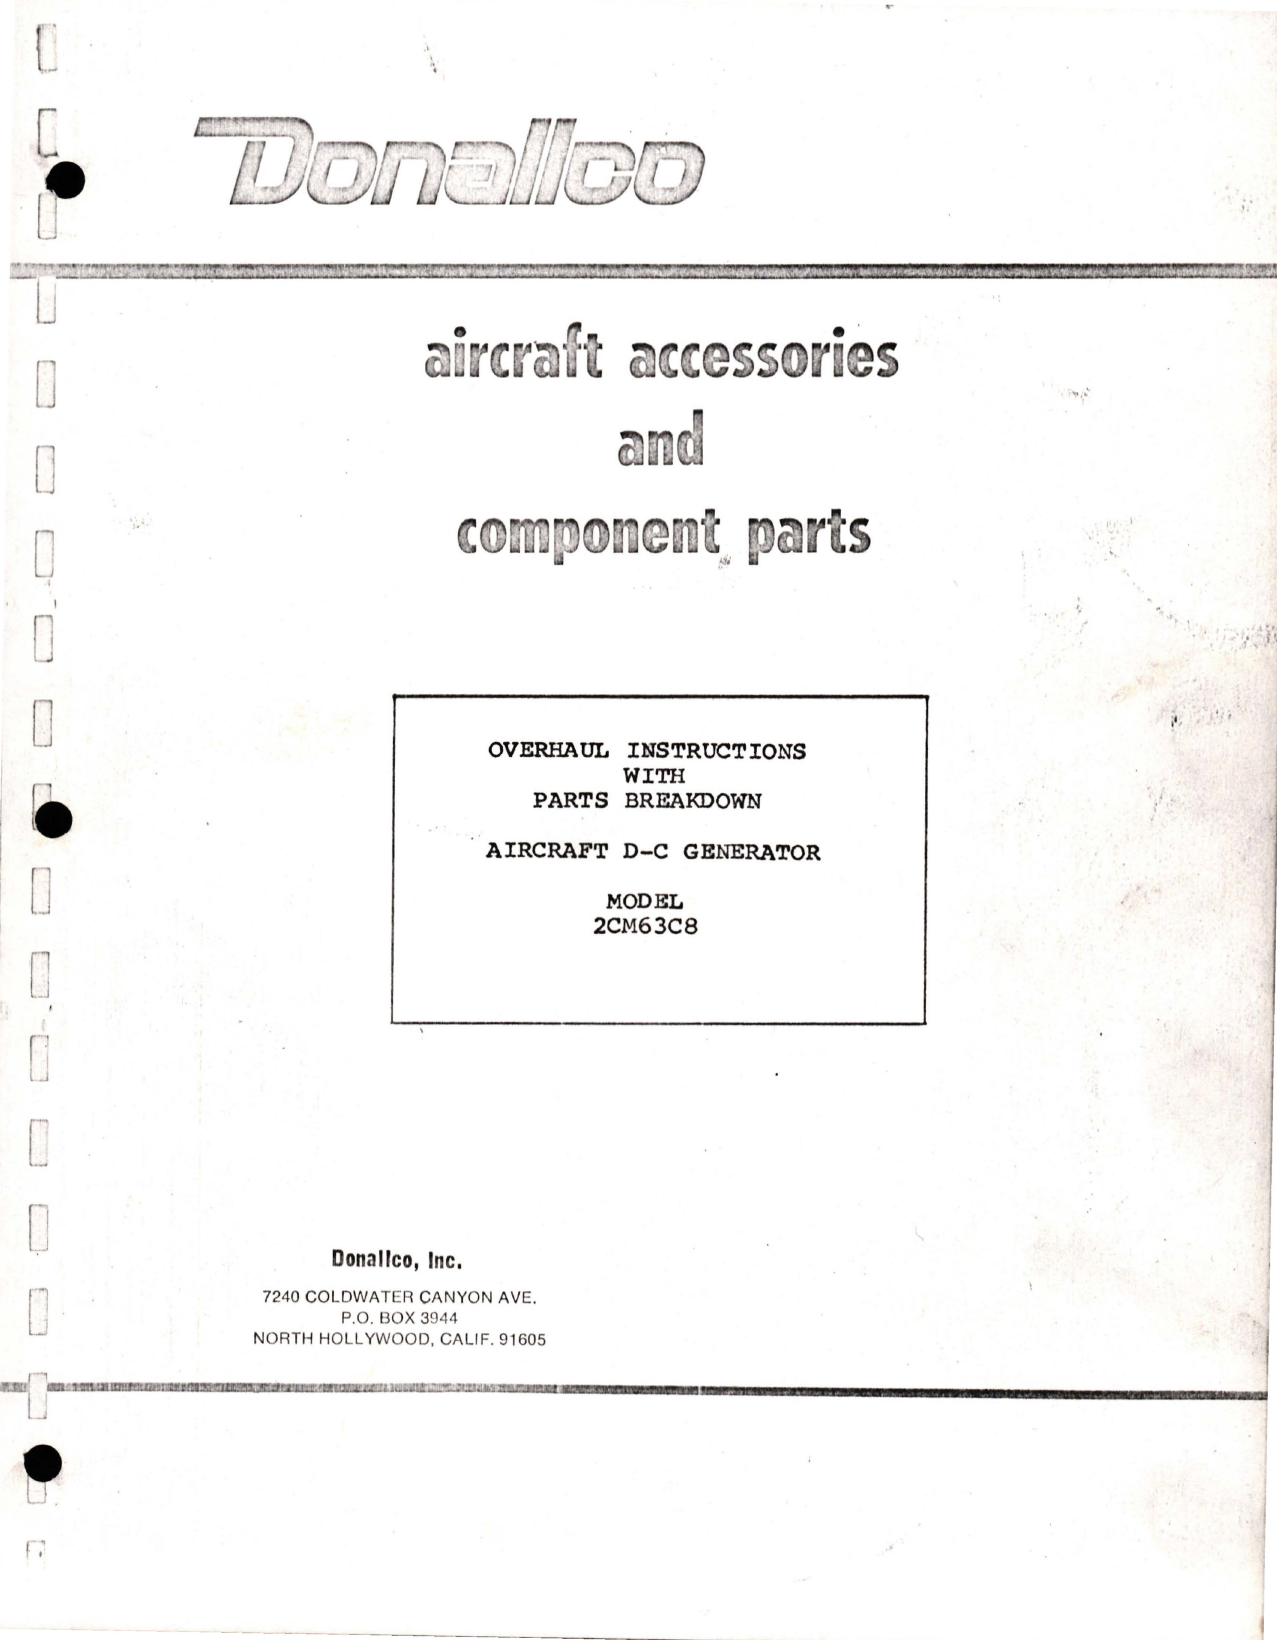 Sample page 1 from AirCorps Library document: Overhaul Instructions with Parts Breakdown for Aircraft DC Generator - Model 2CM63C8